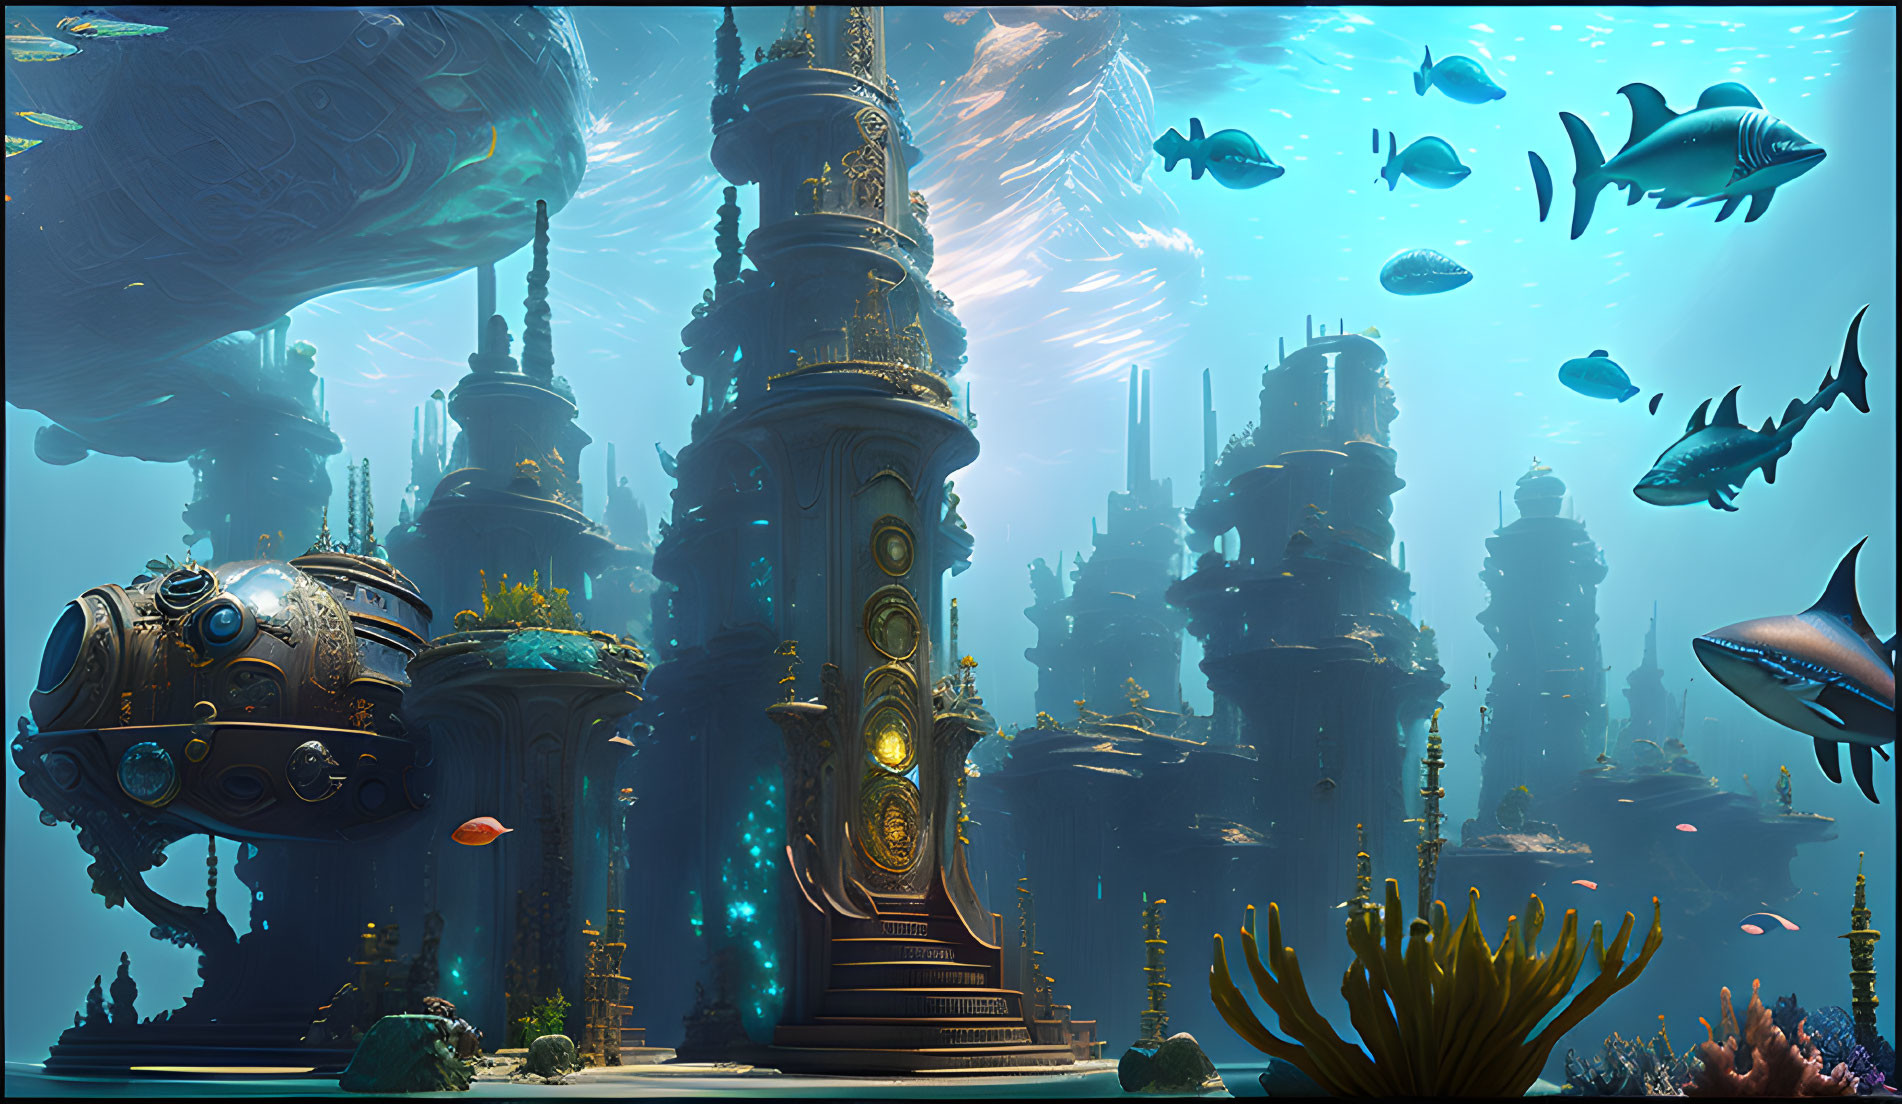 Futuristic underwater cityscape with corals, fish, and illuminated structures